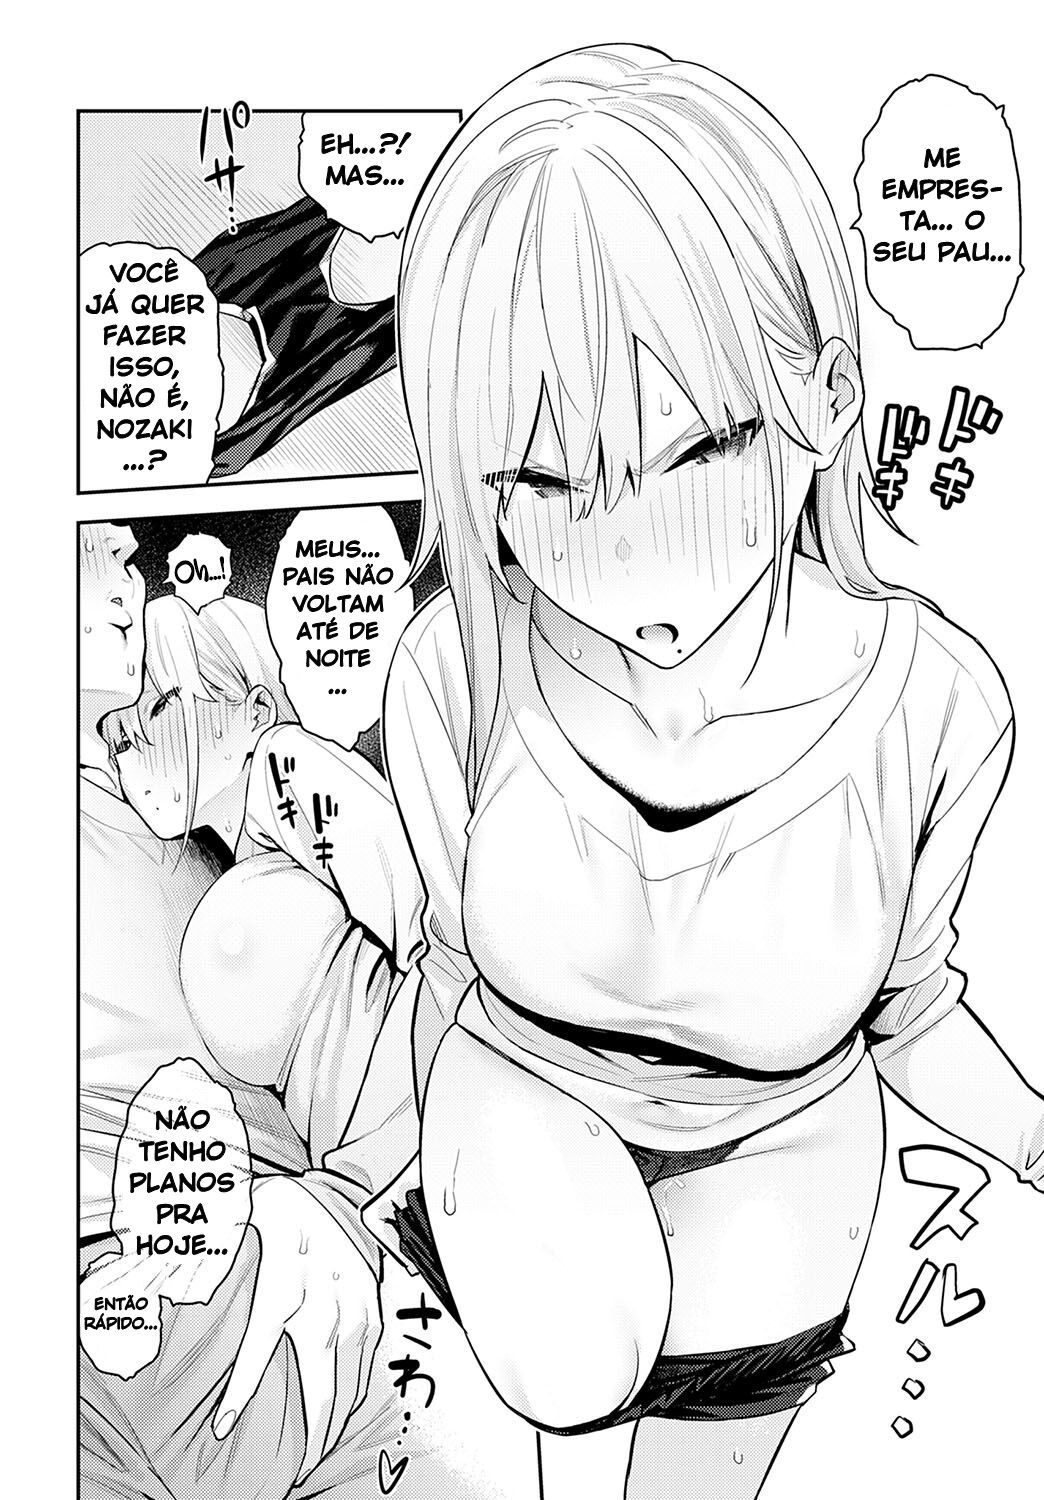 The Beauty And The Beast - The Gyaru And The Disgusting Otaku Hentai pt-br 59